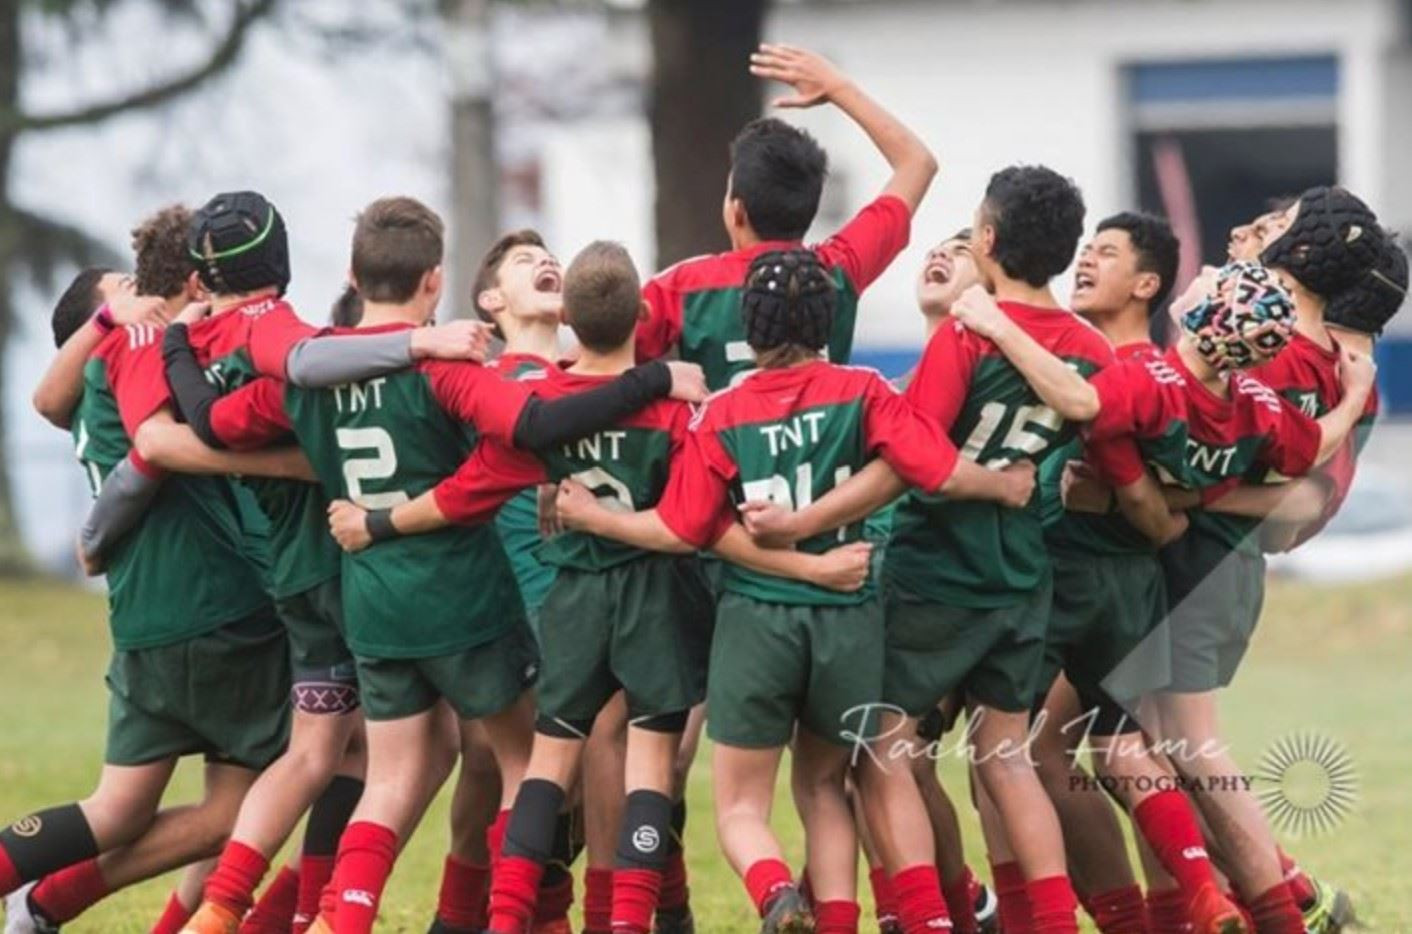 The future is bright for Taupo-nui-a-Tia Rugby